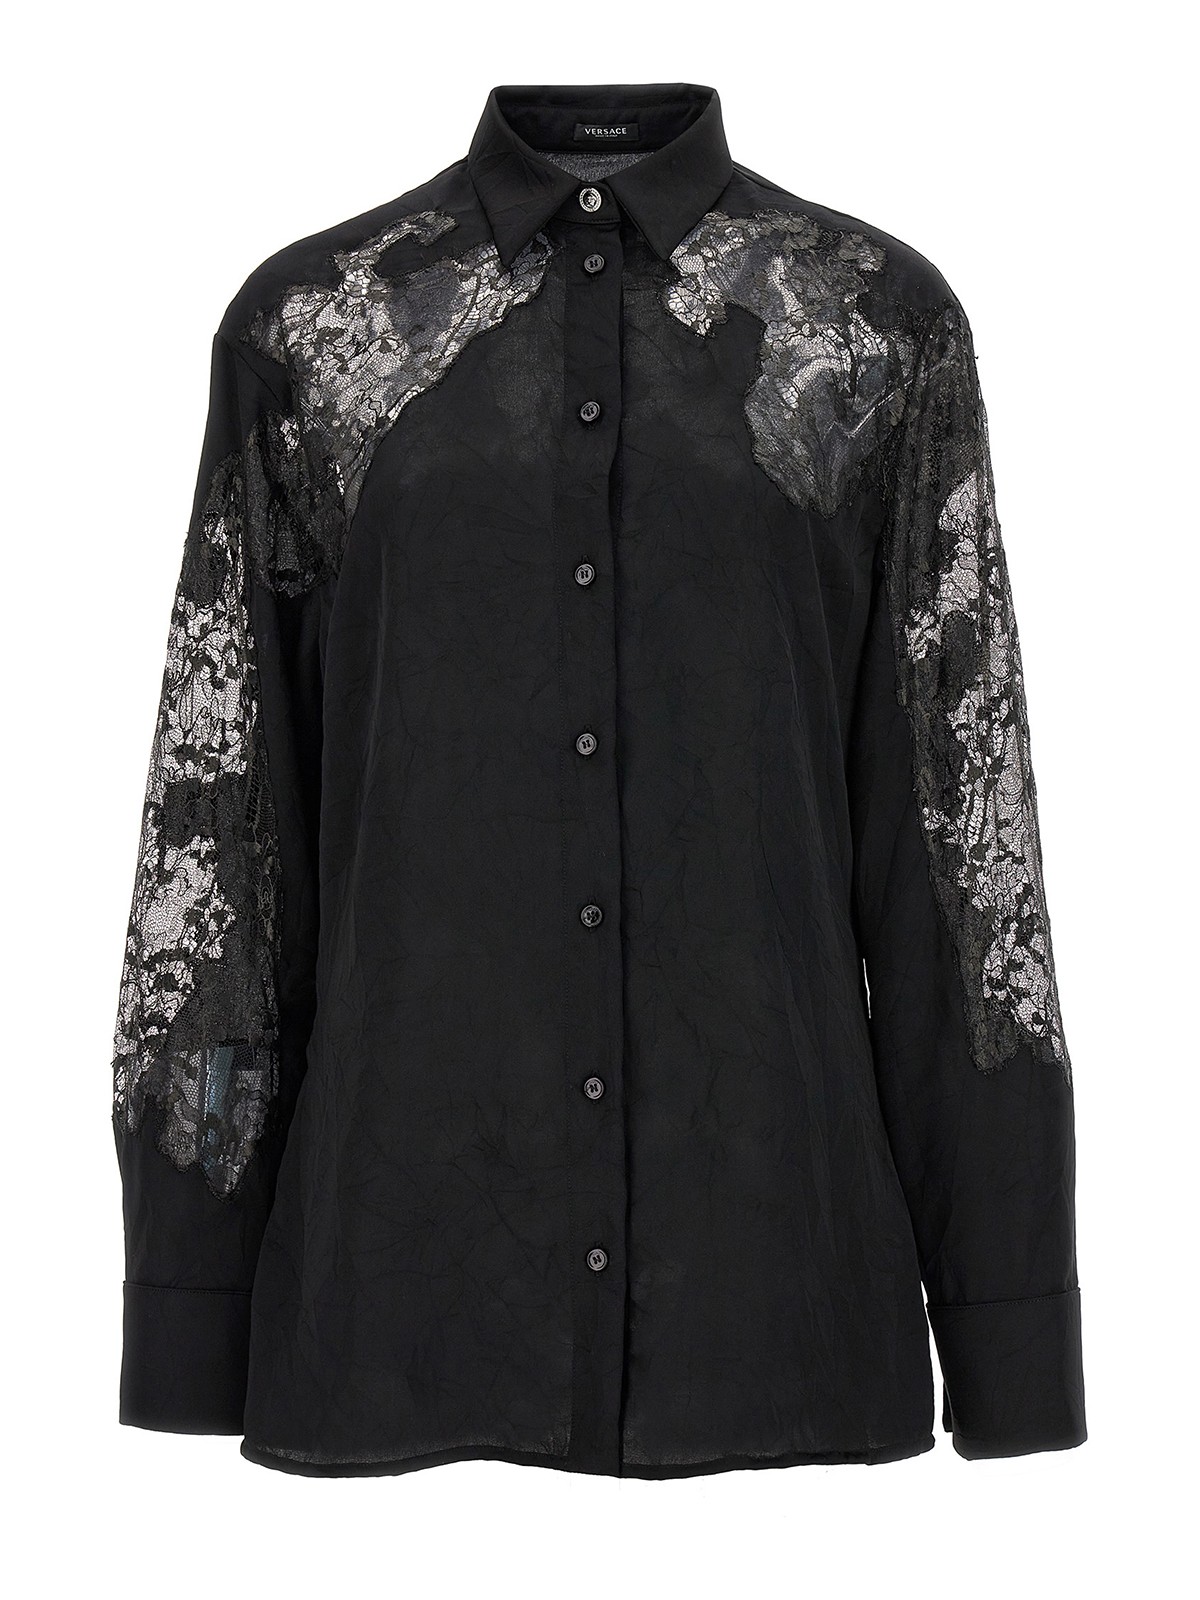 Versace Satin Lace Shirt In Black